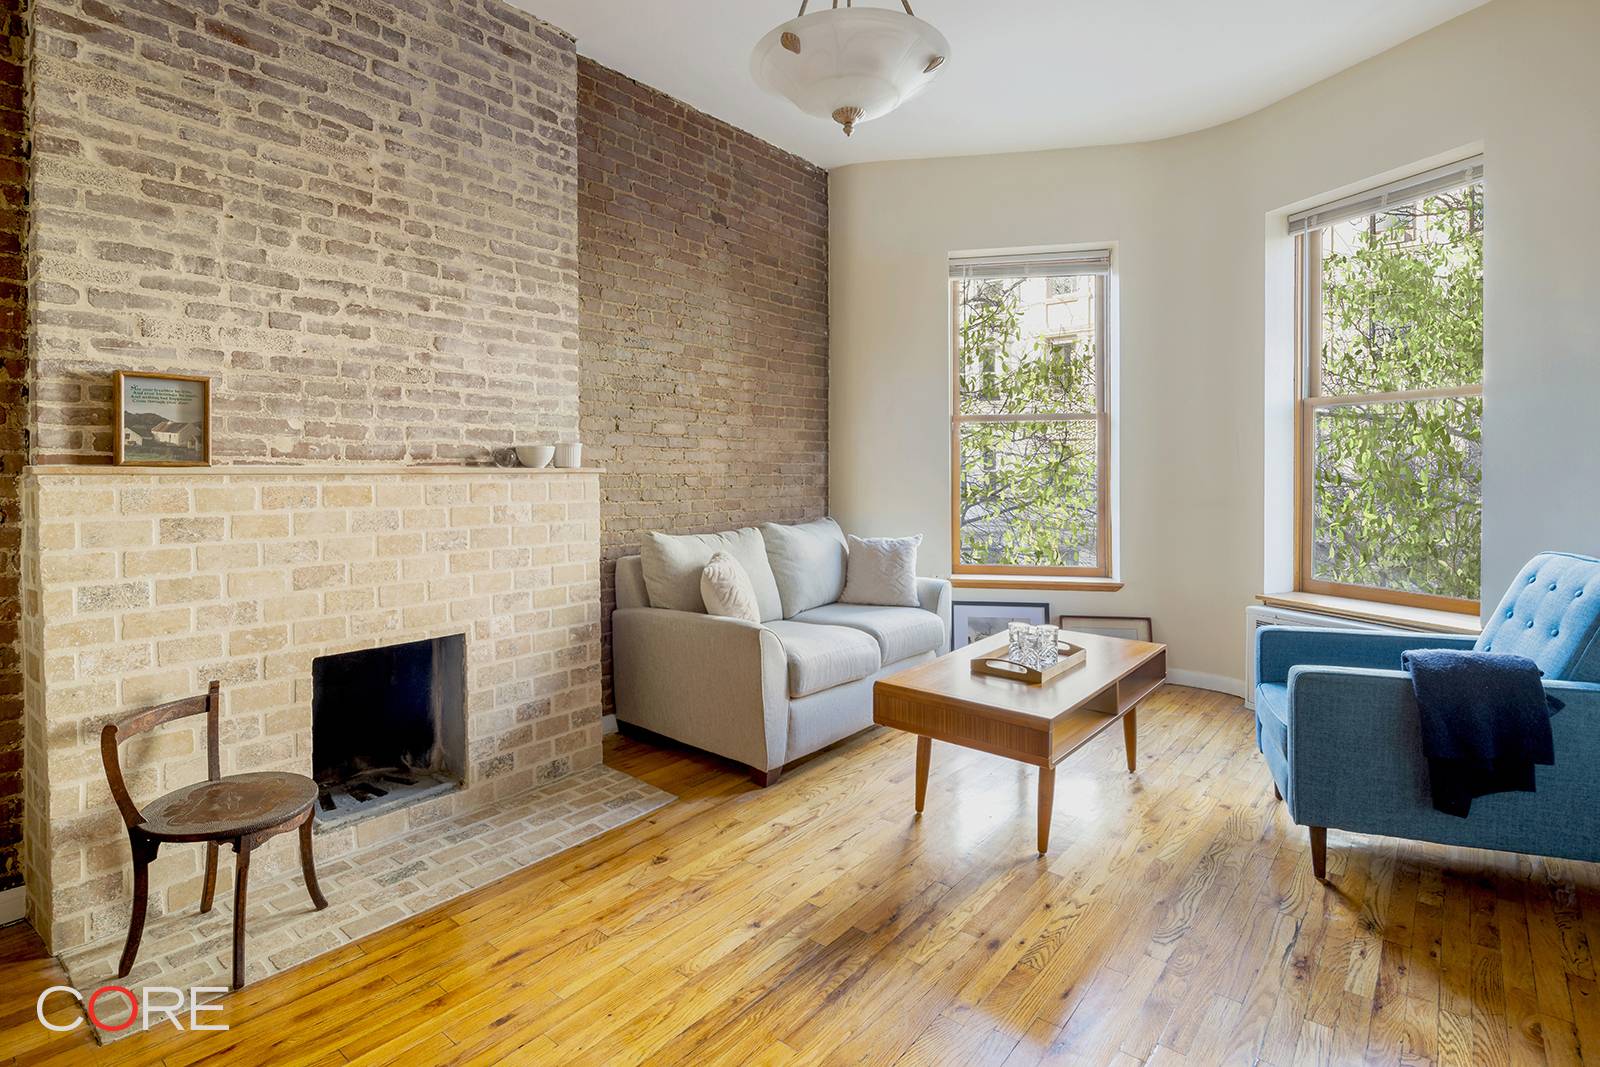 Nestled on a serene, tree lined block within the Central Park West West 76th Street Historic District, 40 West 76th Street welcomes you to a stunning landmark pre war boutique ...